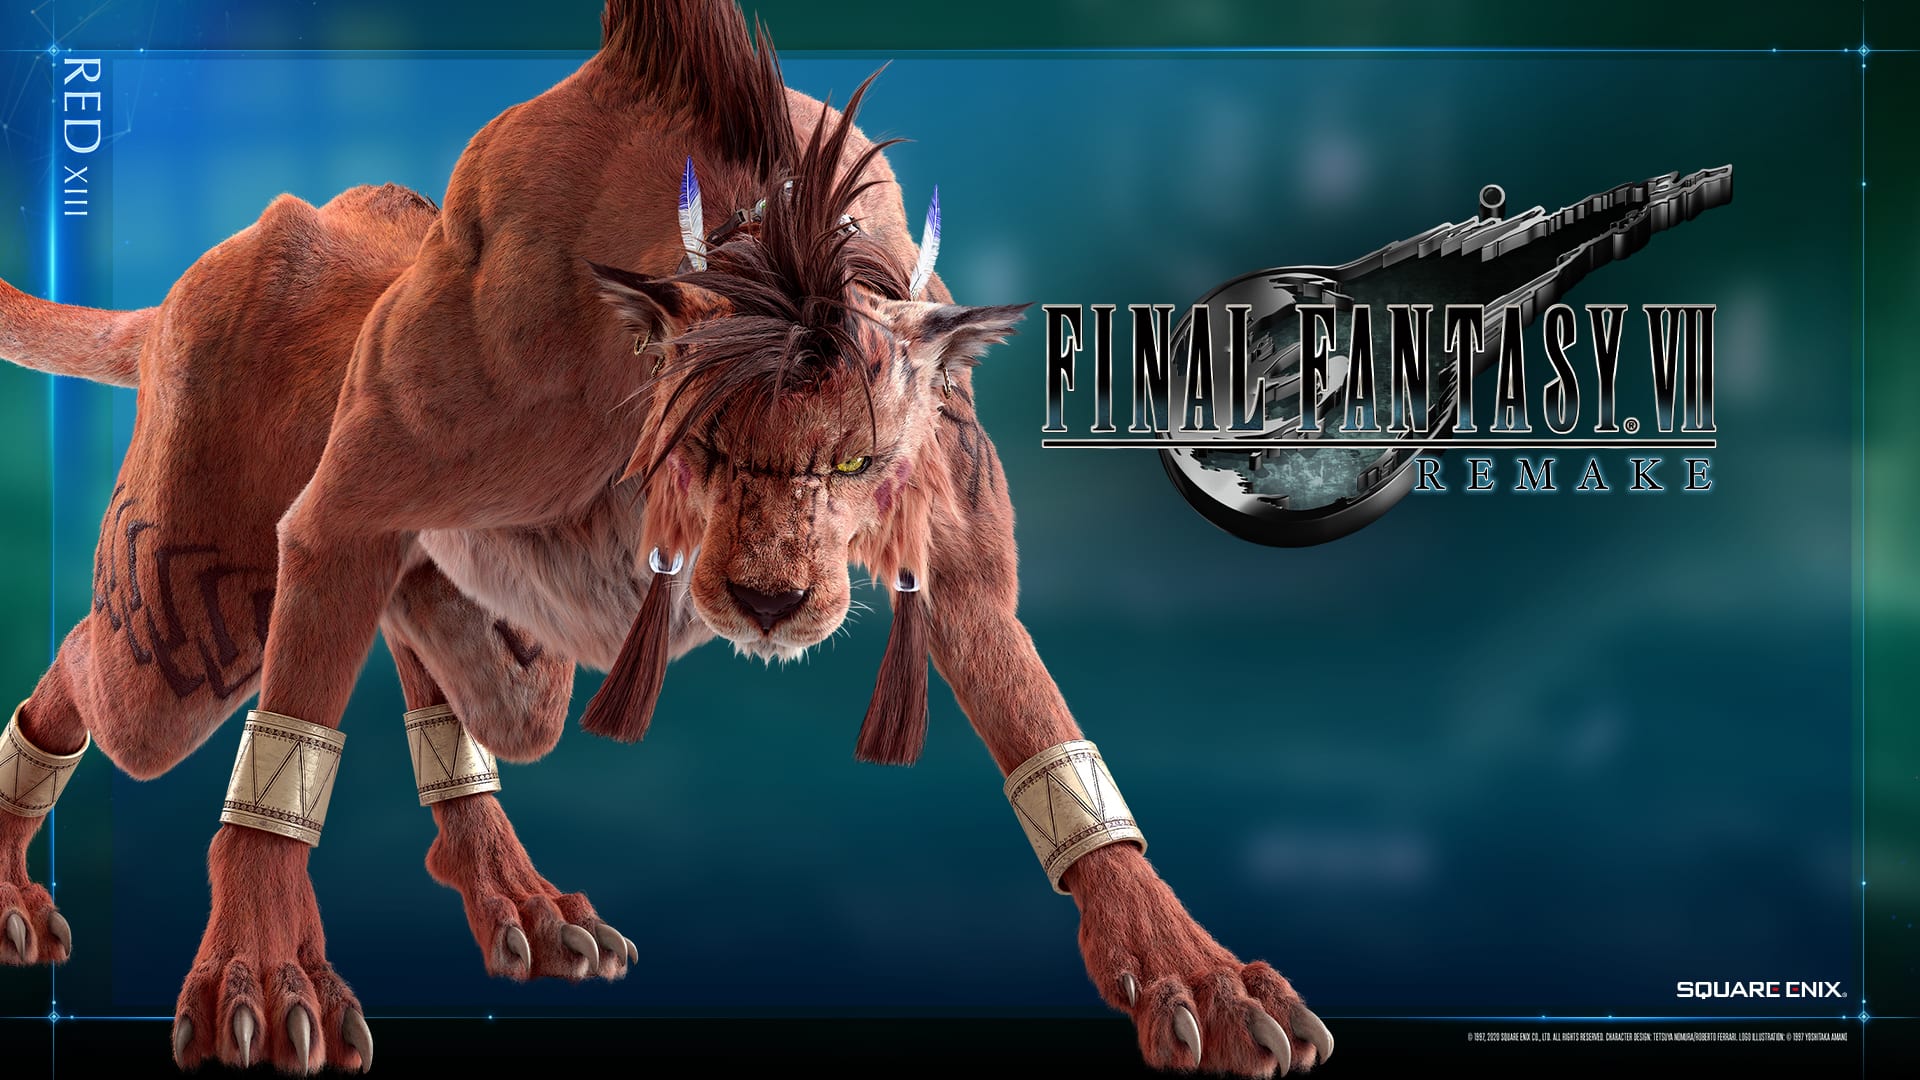 Final Fantasy VII Remake's Red XIII Looks Majestic in New Wallpaper and Avatars